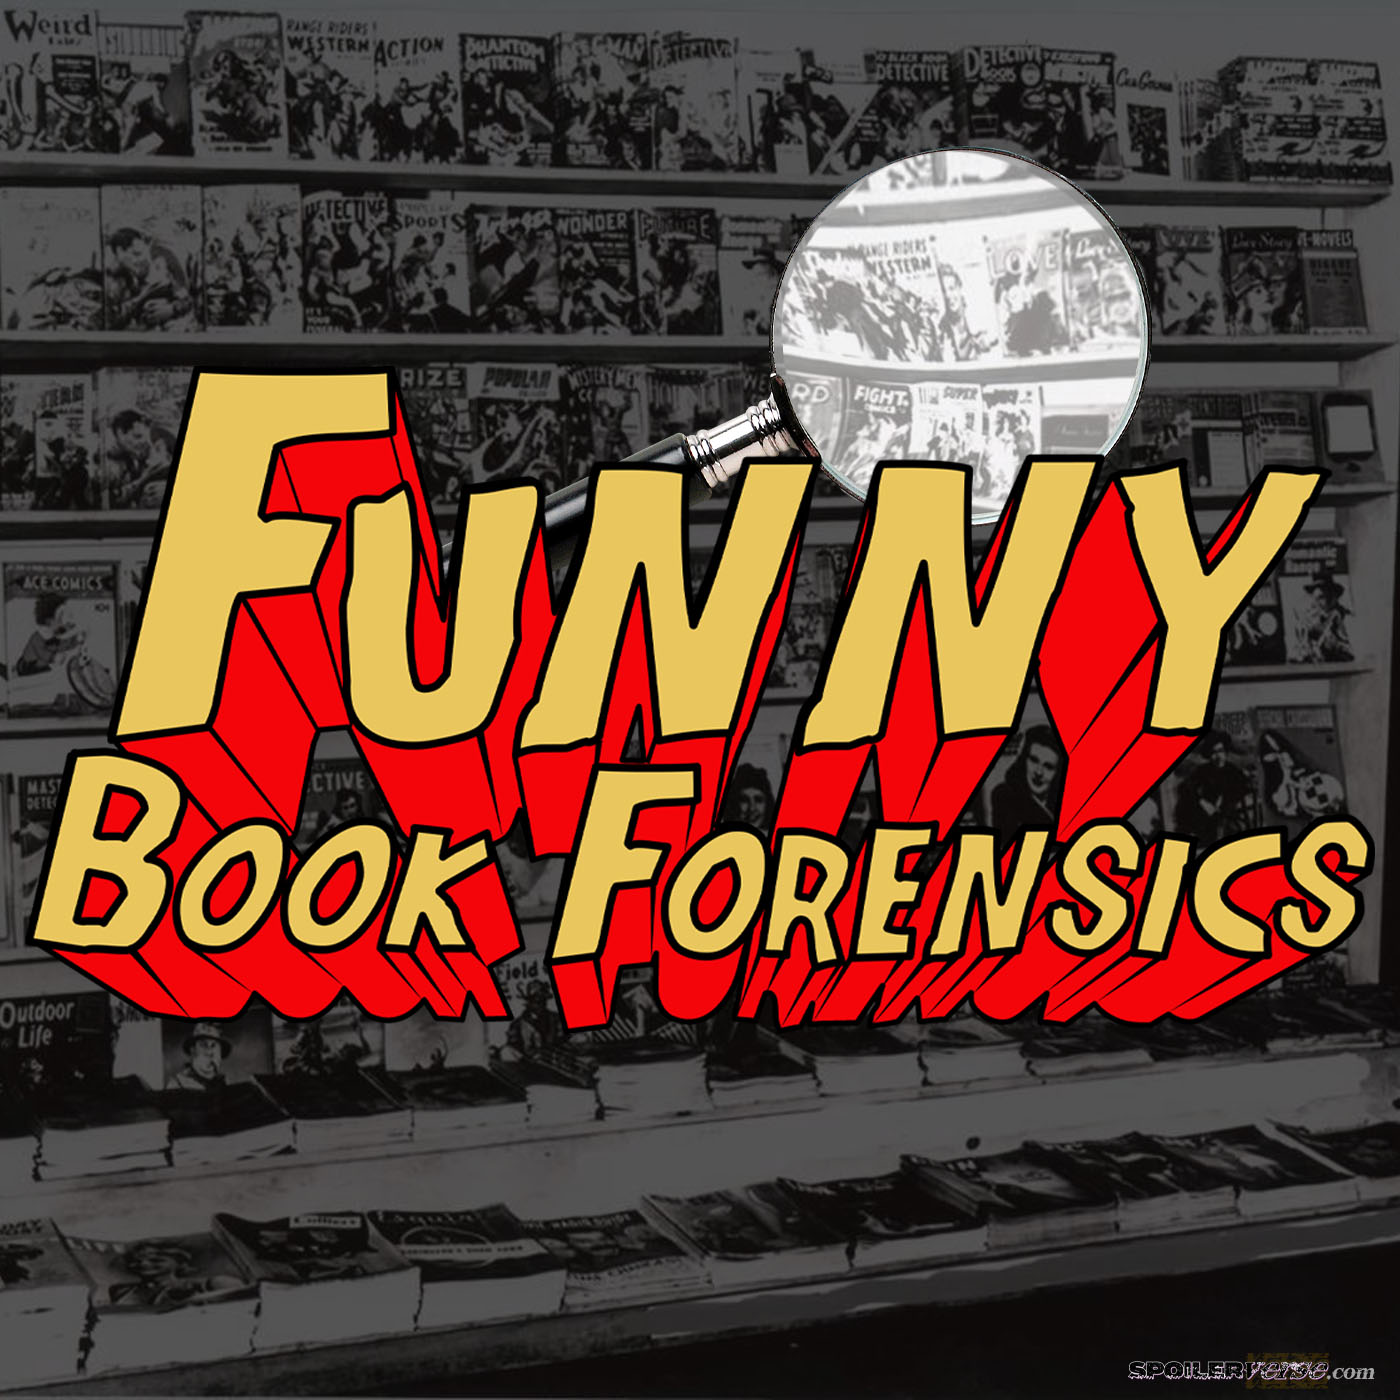 Funny Book Forensics 352 Mordru and the Terrible, Horrible, No Good, Very Bad Day